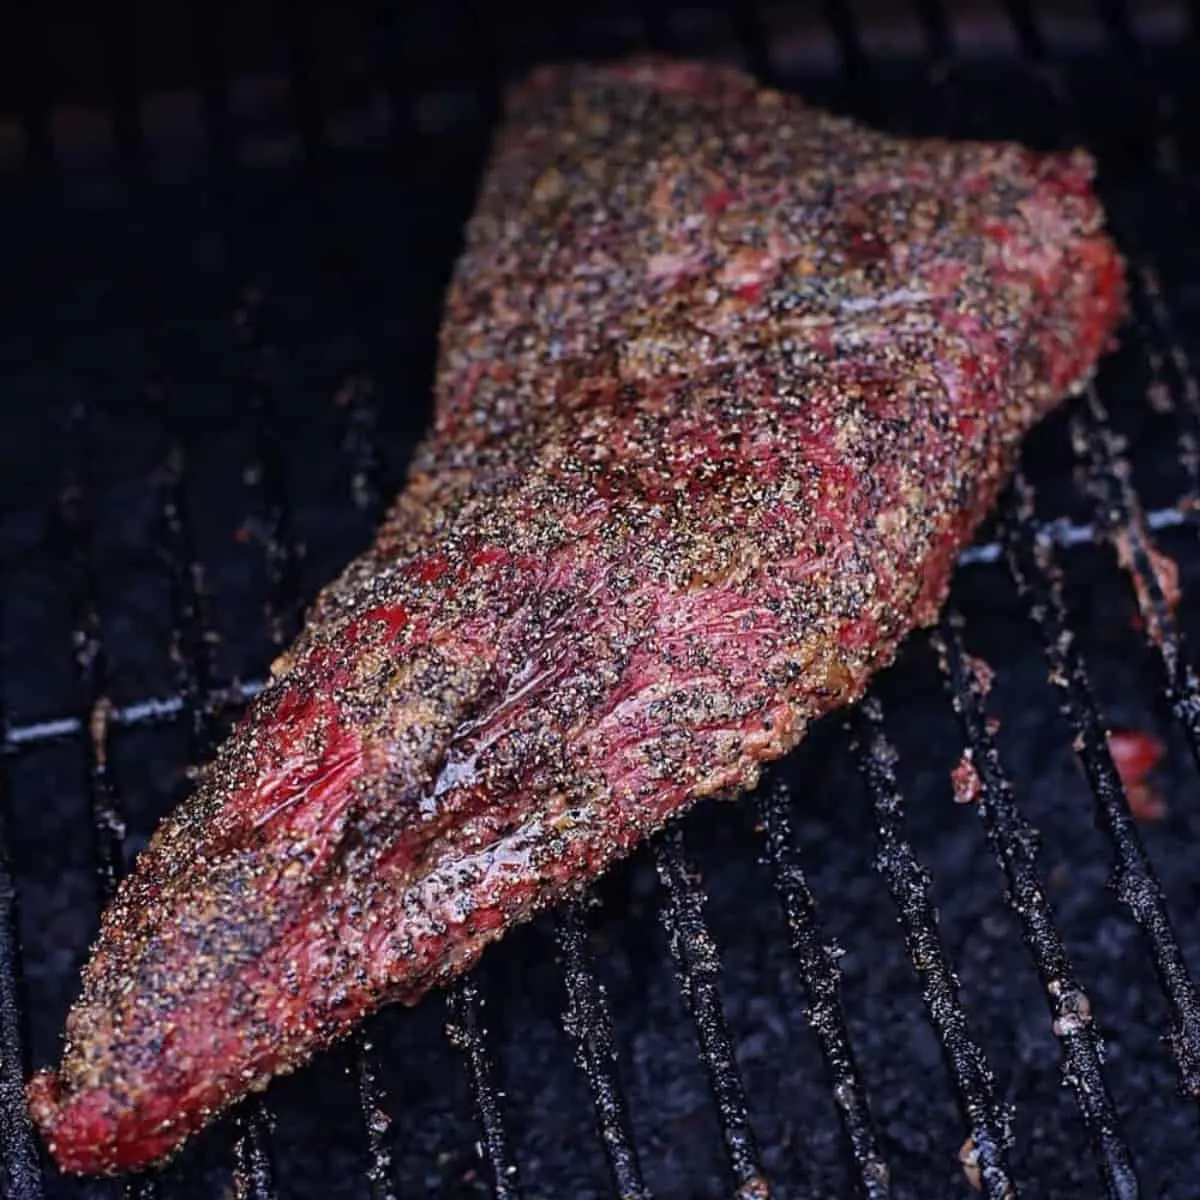 recipe for smoked tri-tip - How long does it usually take to smoke a tri-tip